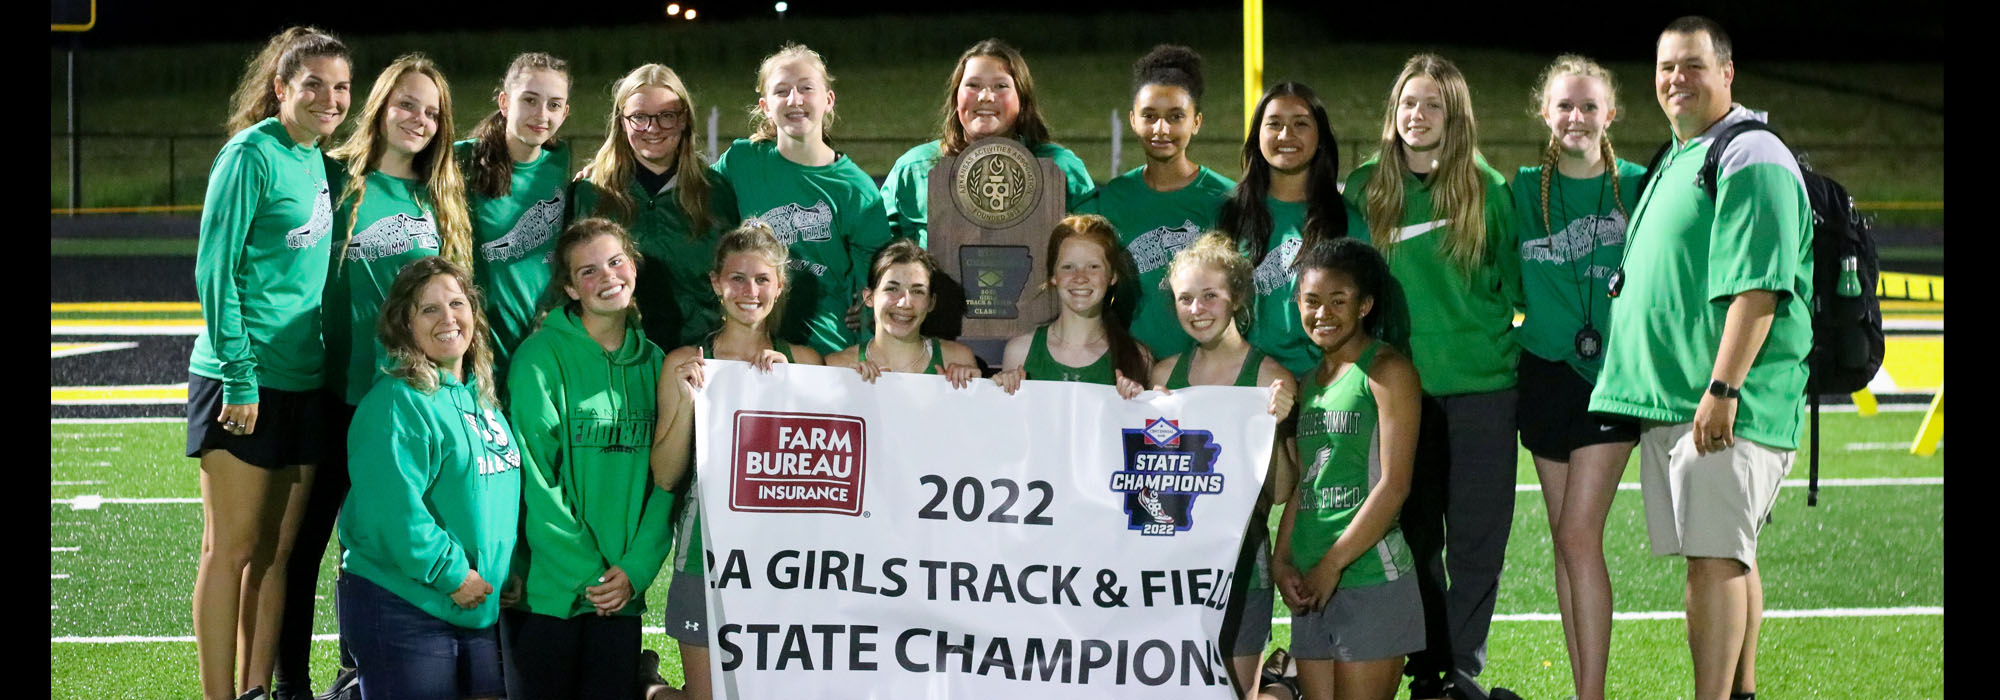 2022 2A Girls Track & Field Back-to-Back State Champions